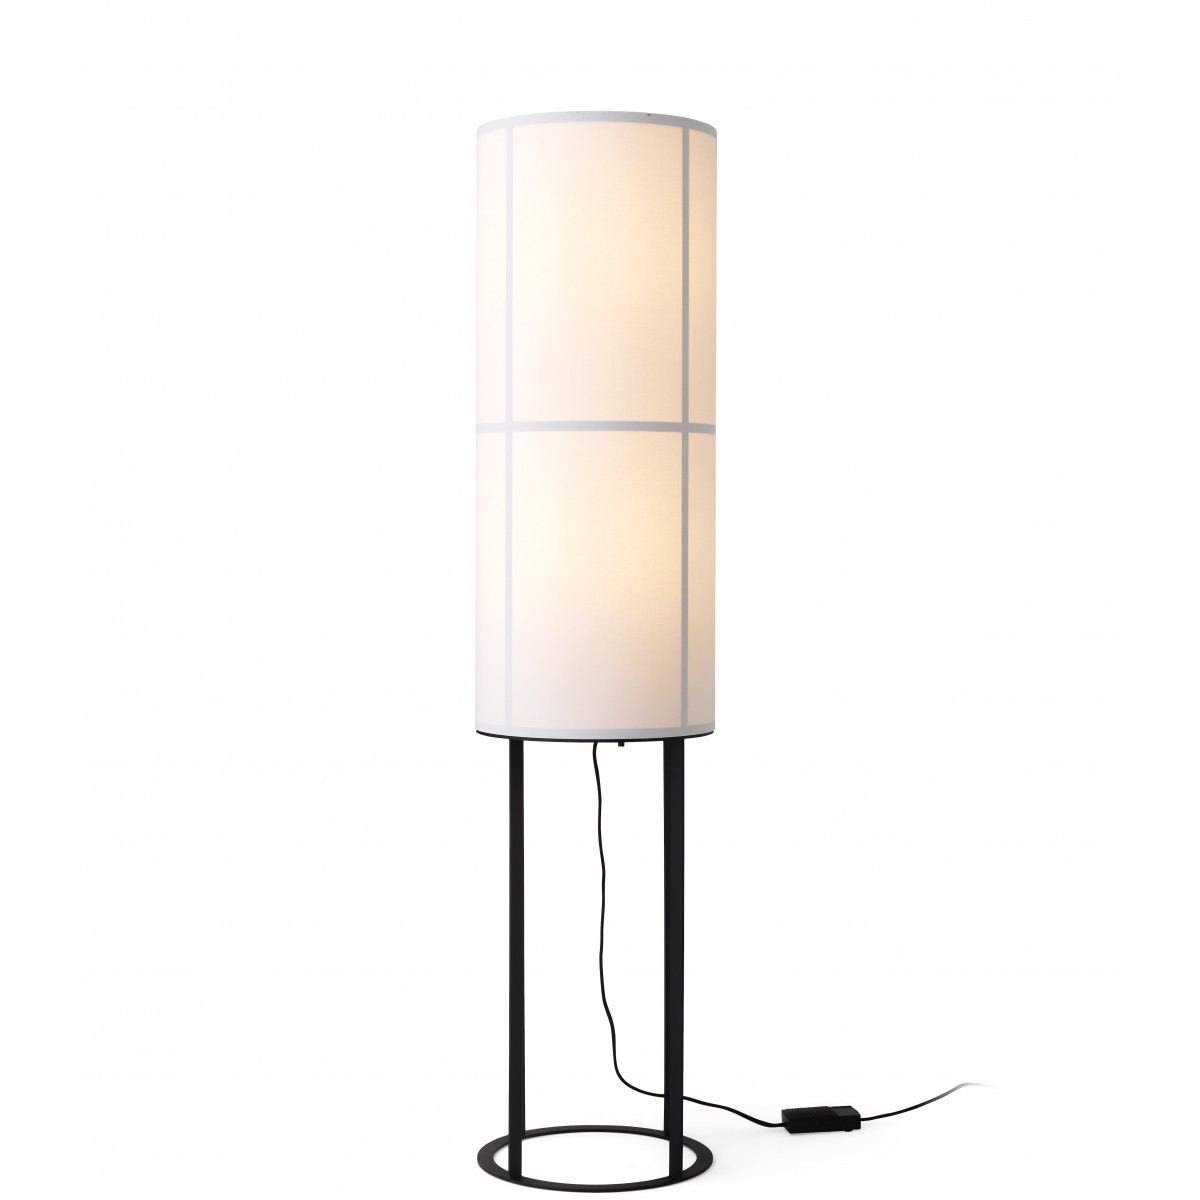 OUT OF STOCK - white - Hashira high floor lamp